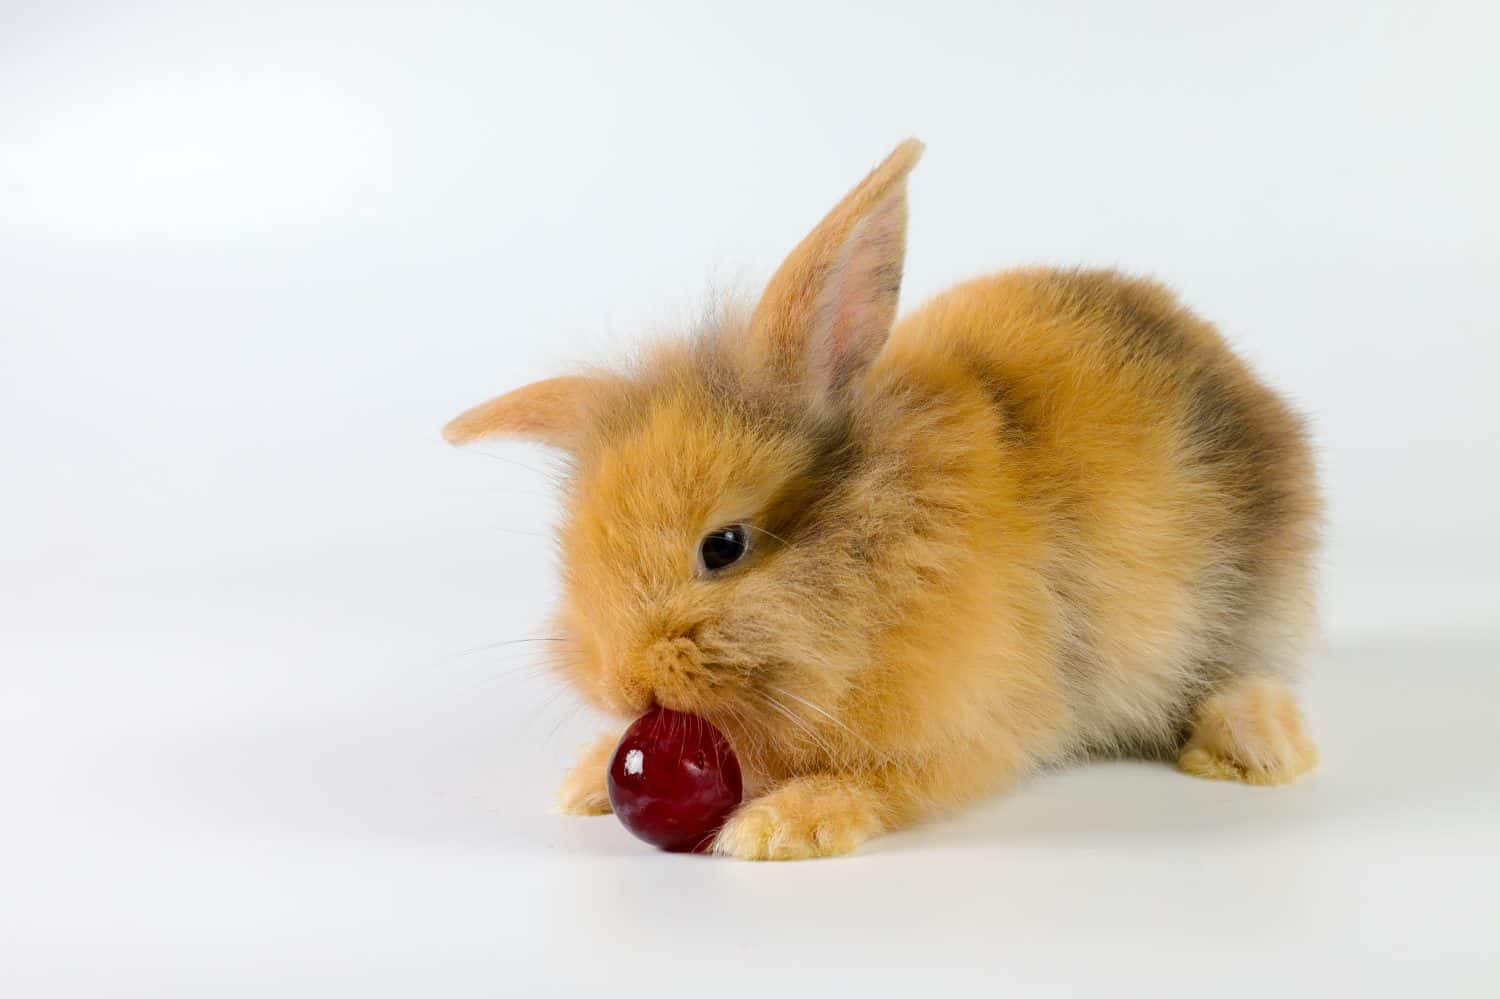 Lovely bunny easter brown rabbit eating red grapeon white background, 1 month old rabbit. selective focus.Animal concept.